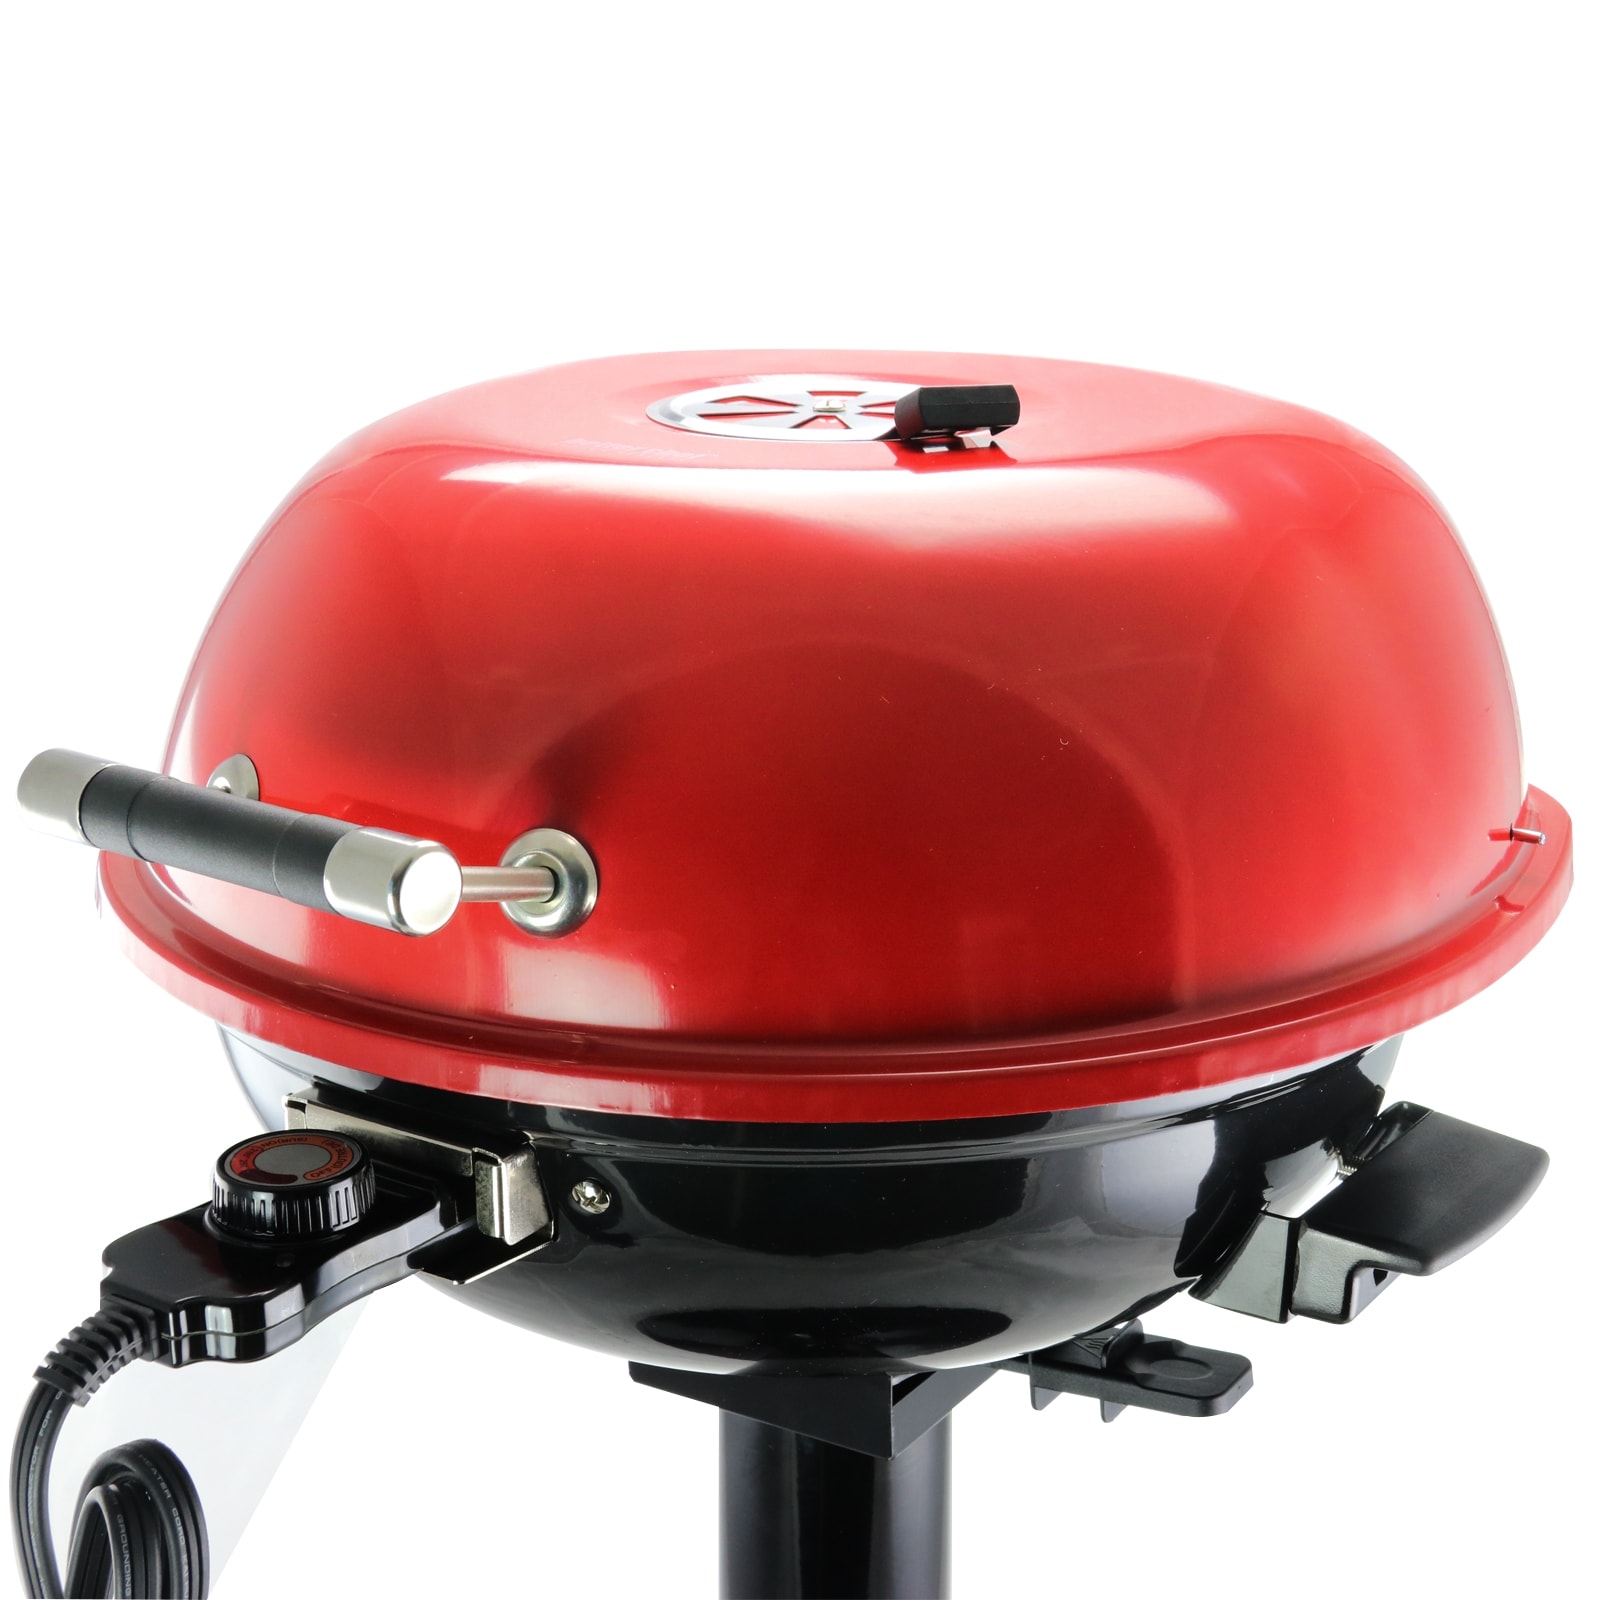 BETTER CHEF 1000W 12 INDOOR ELECTRIC BLACK TABLETOP BARBECUE BBQ